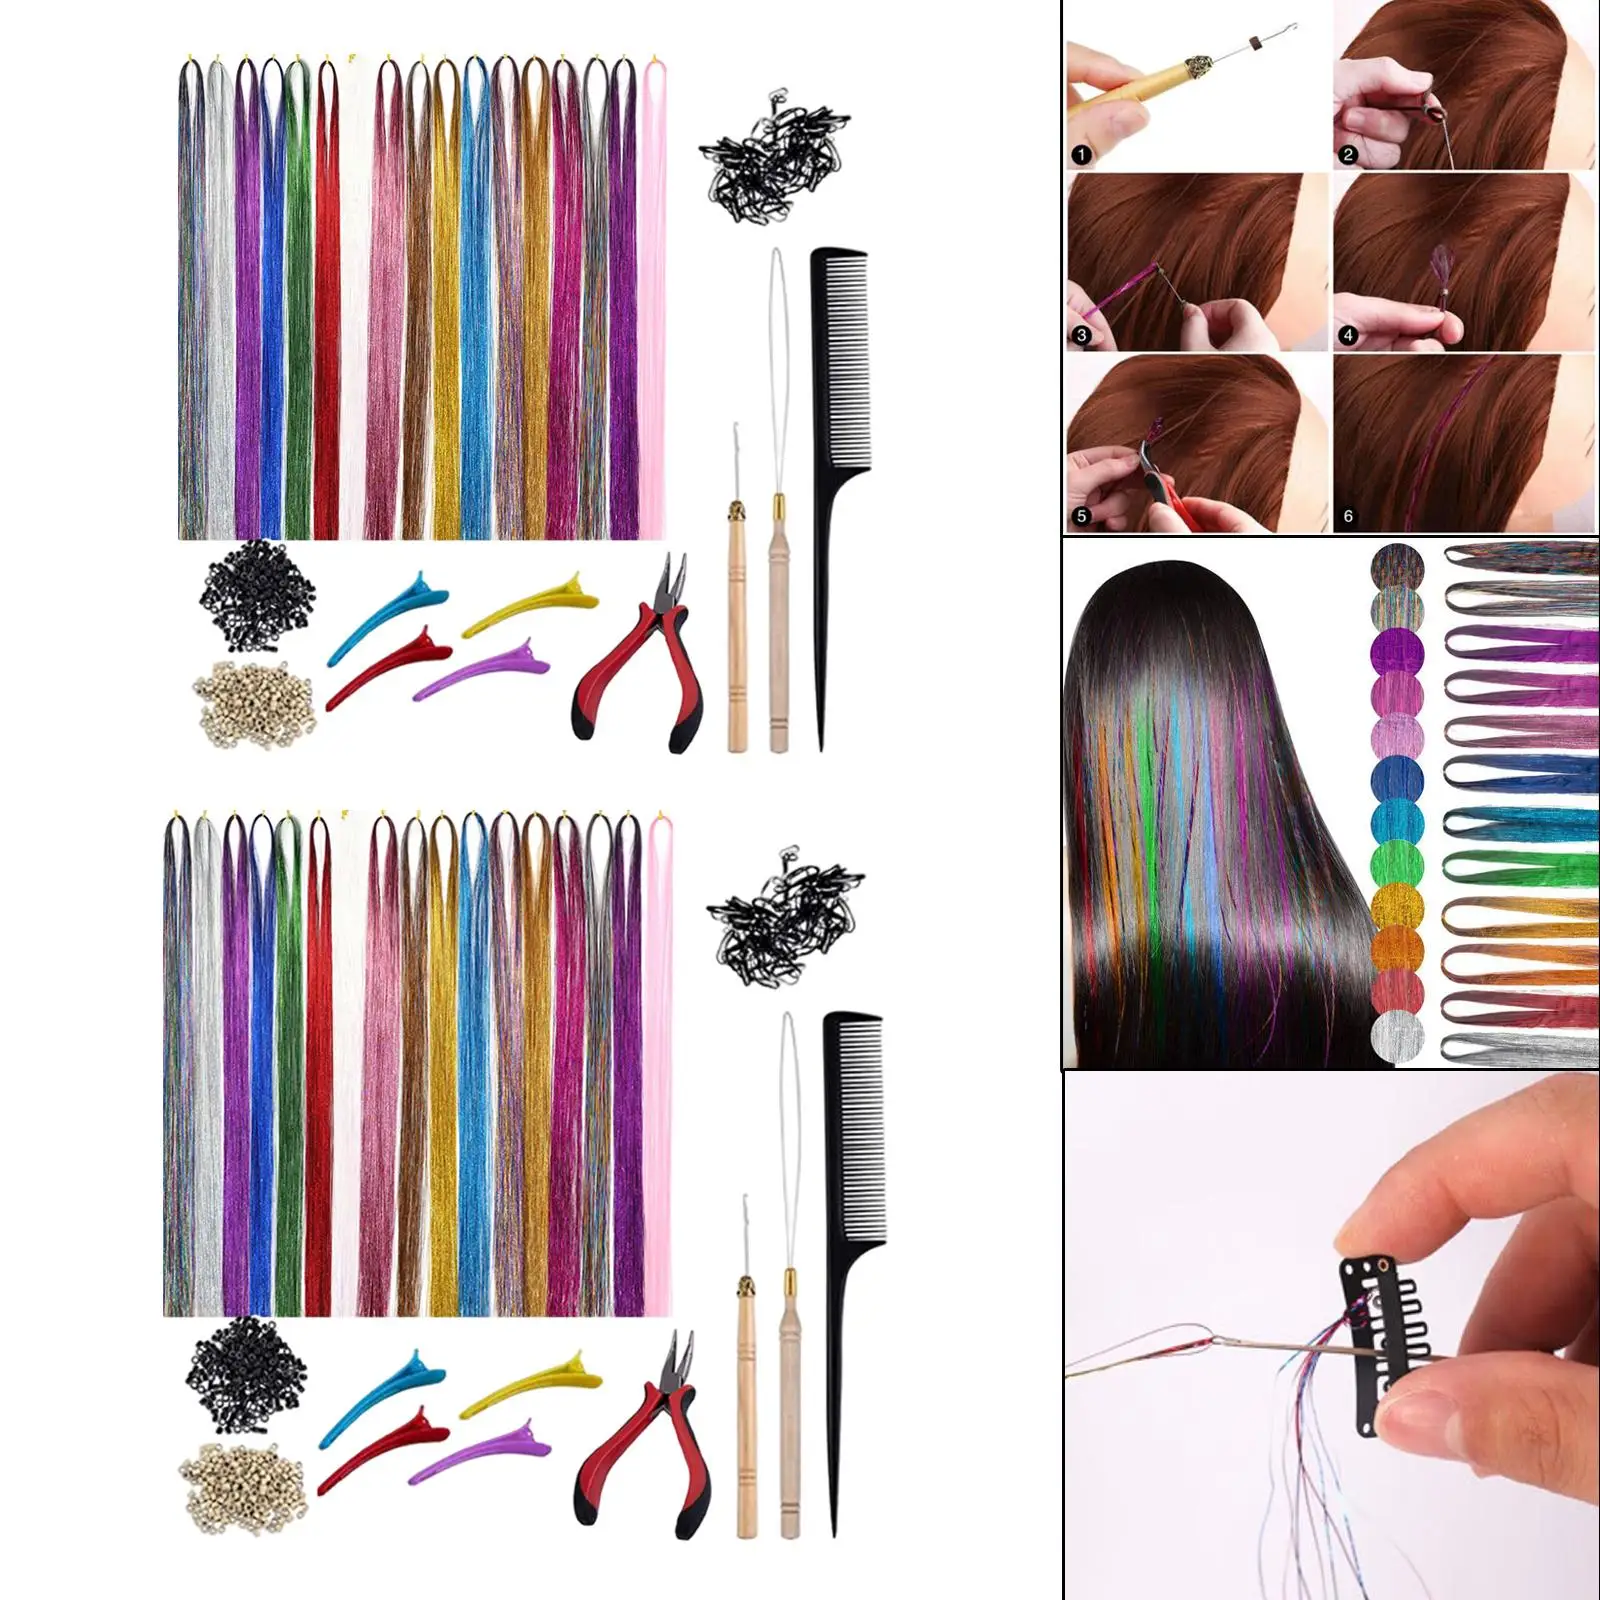  Tinsel Kit 12 Colors 200Pcs Rings Beads Hair Accessories with Tools for Cosplay Hair Styling Party Braiding Hair Women Girls